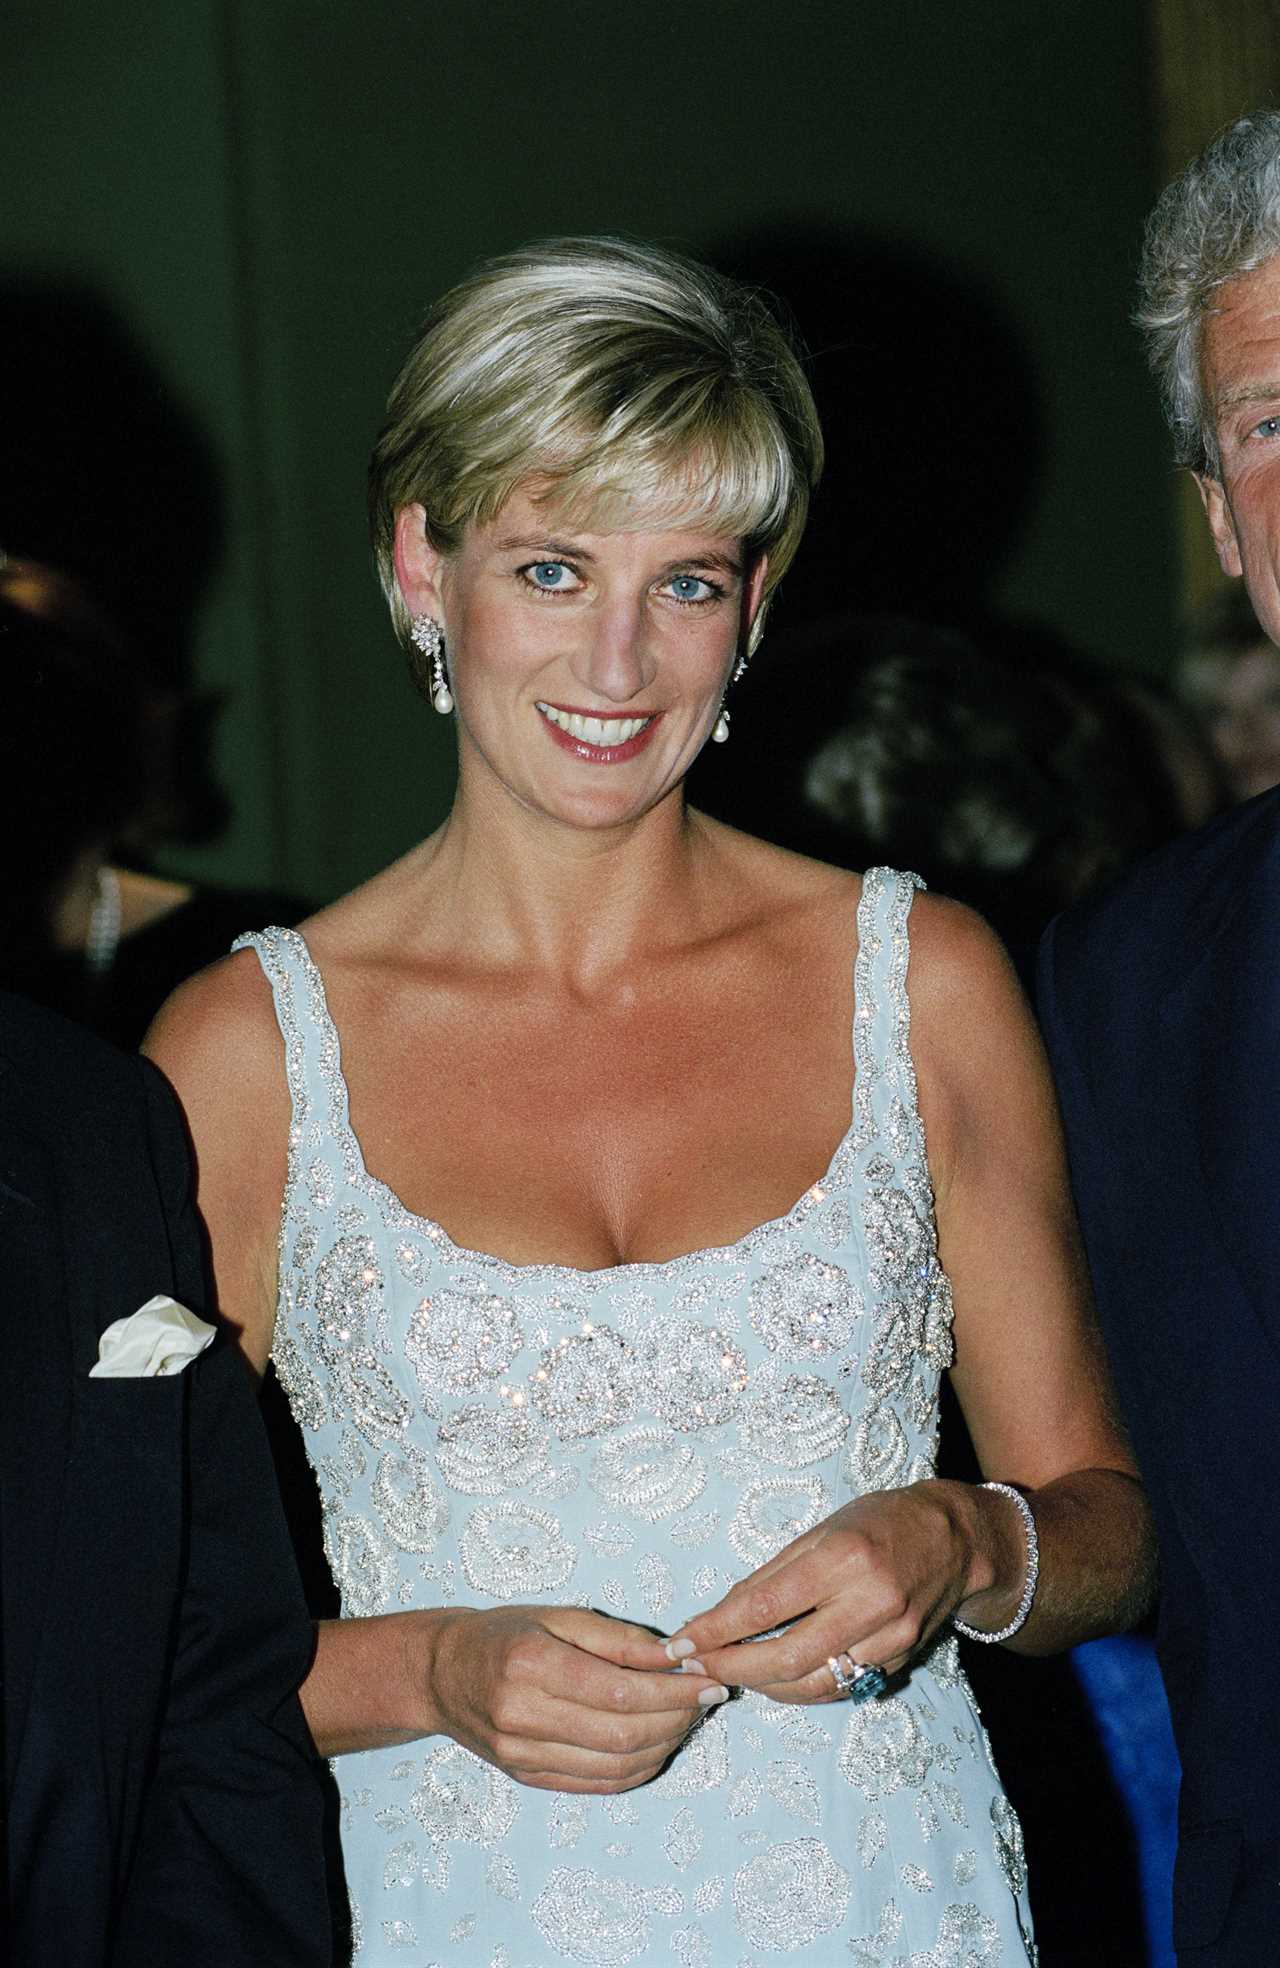 Who plays Princess Diana in The Crown and who else has played her?